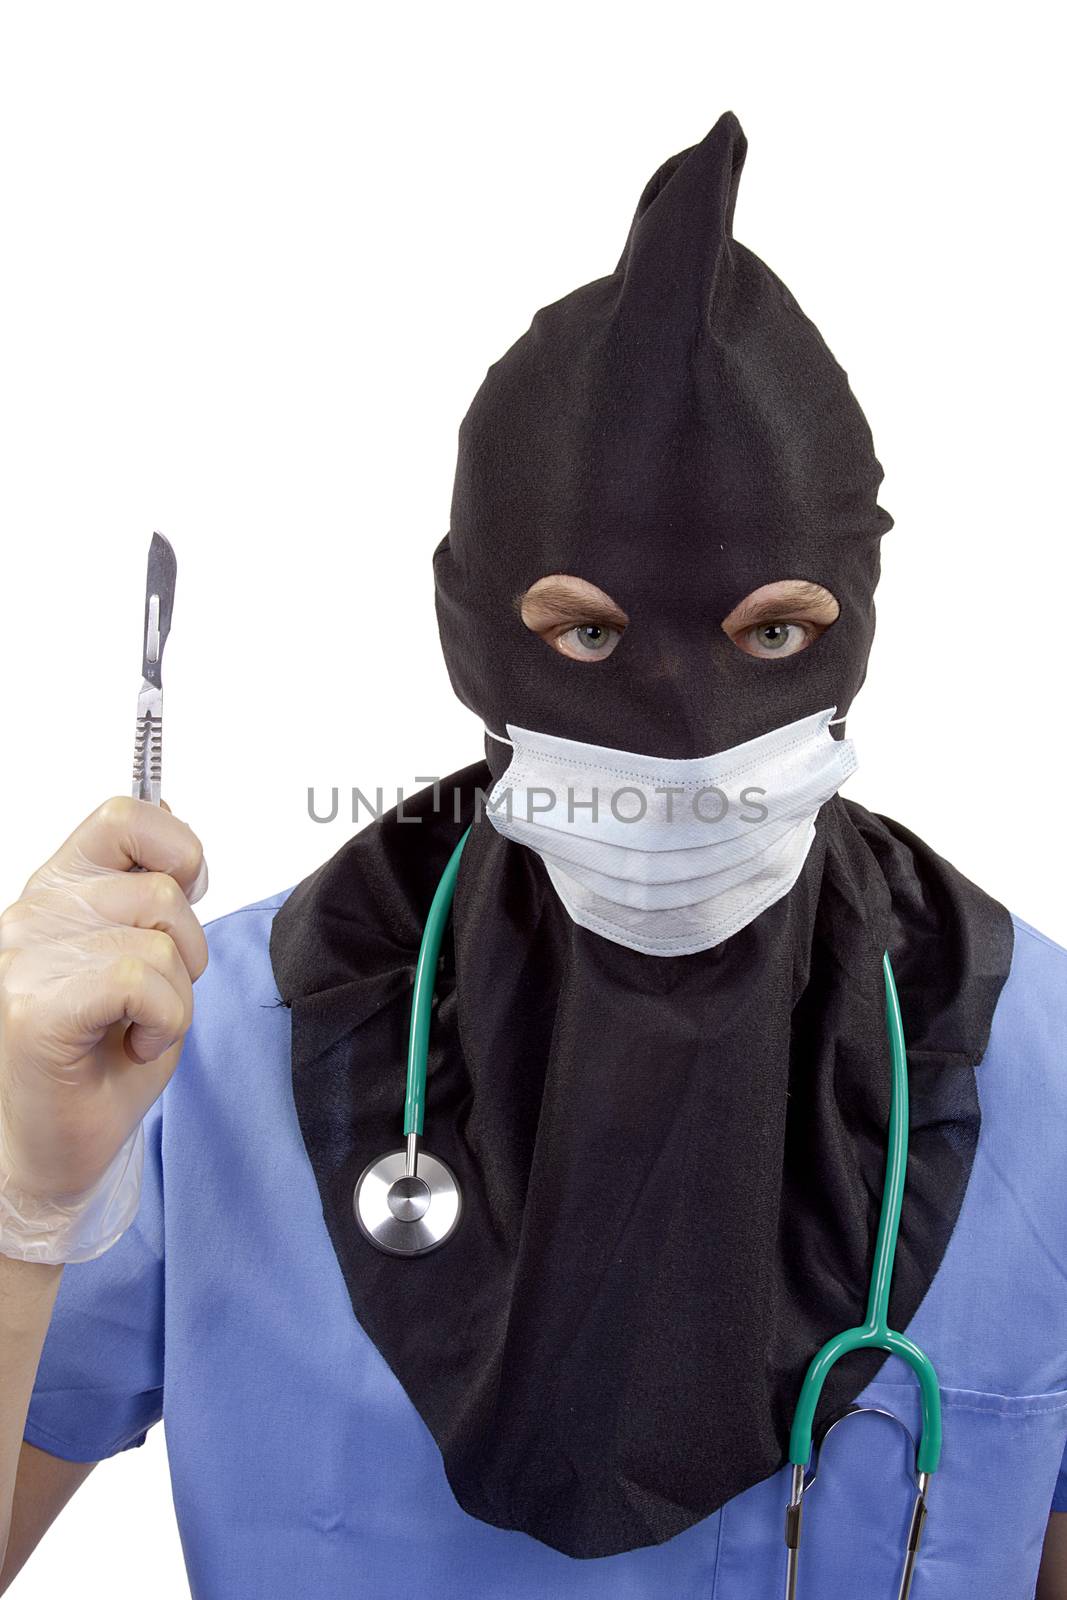 Creative on negligence in surgery. A doctor in a mask executioner.